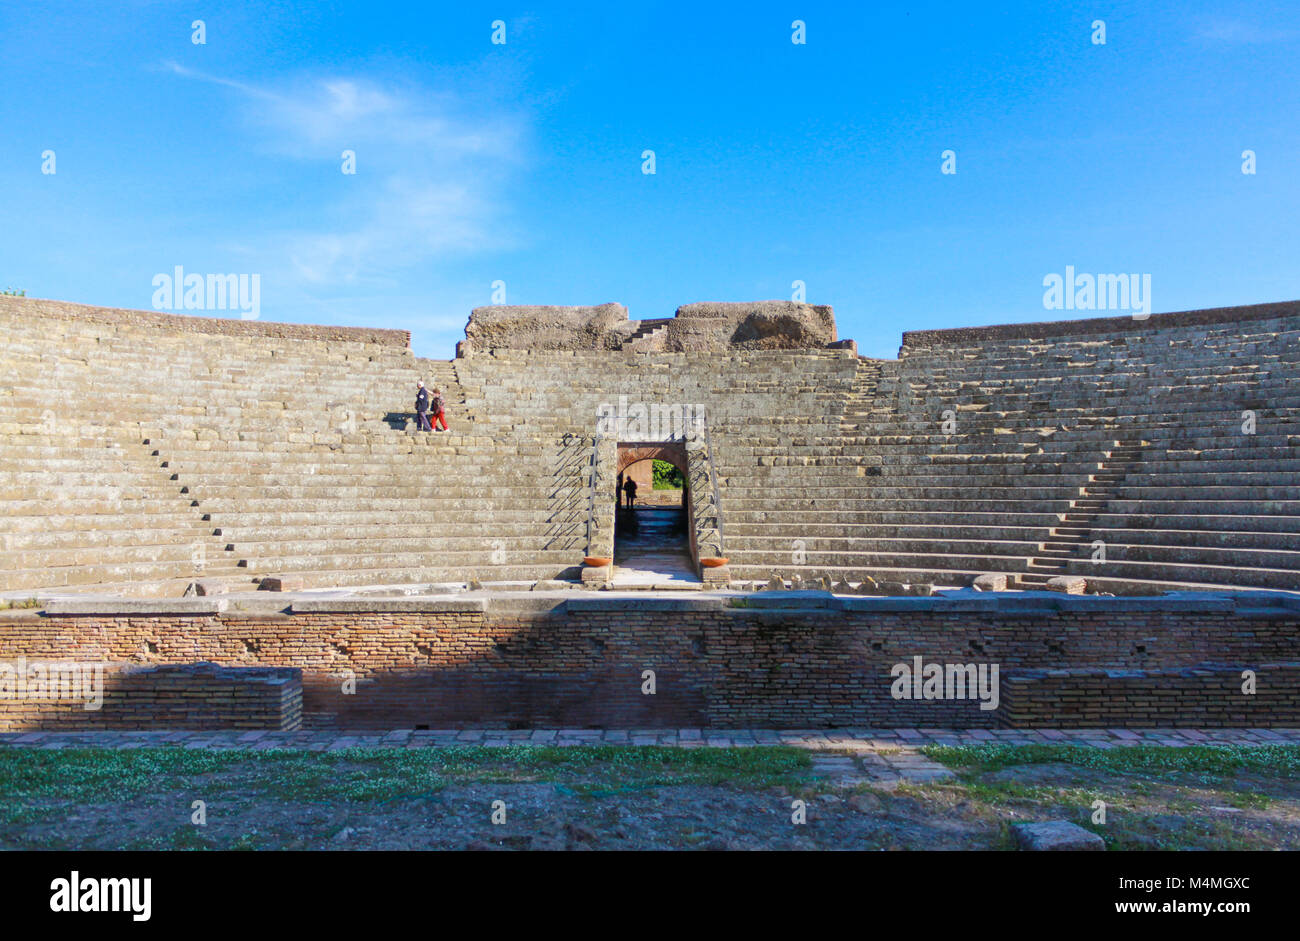 OSTIA ANTICA RUINS: VIEW OF THE AMPHITHEATER. Stock Photo